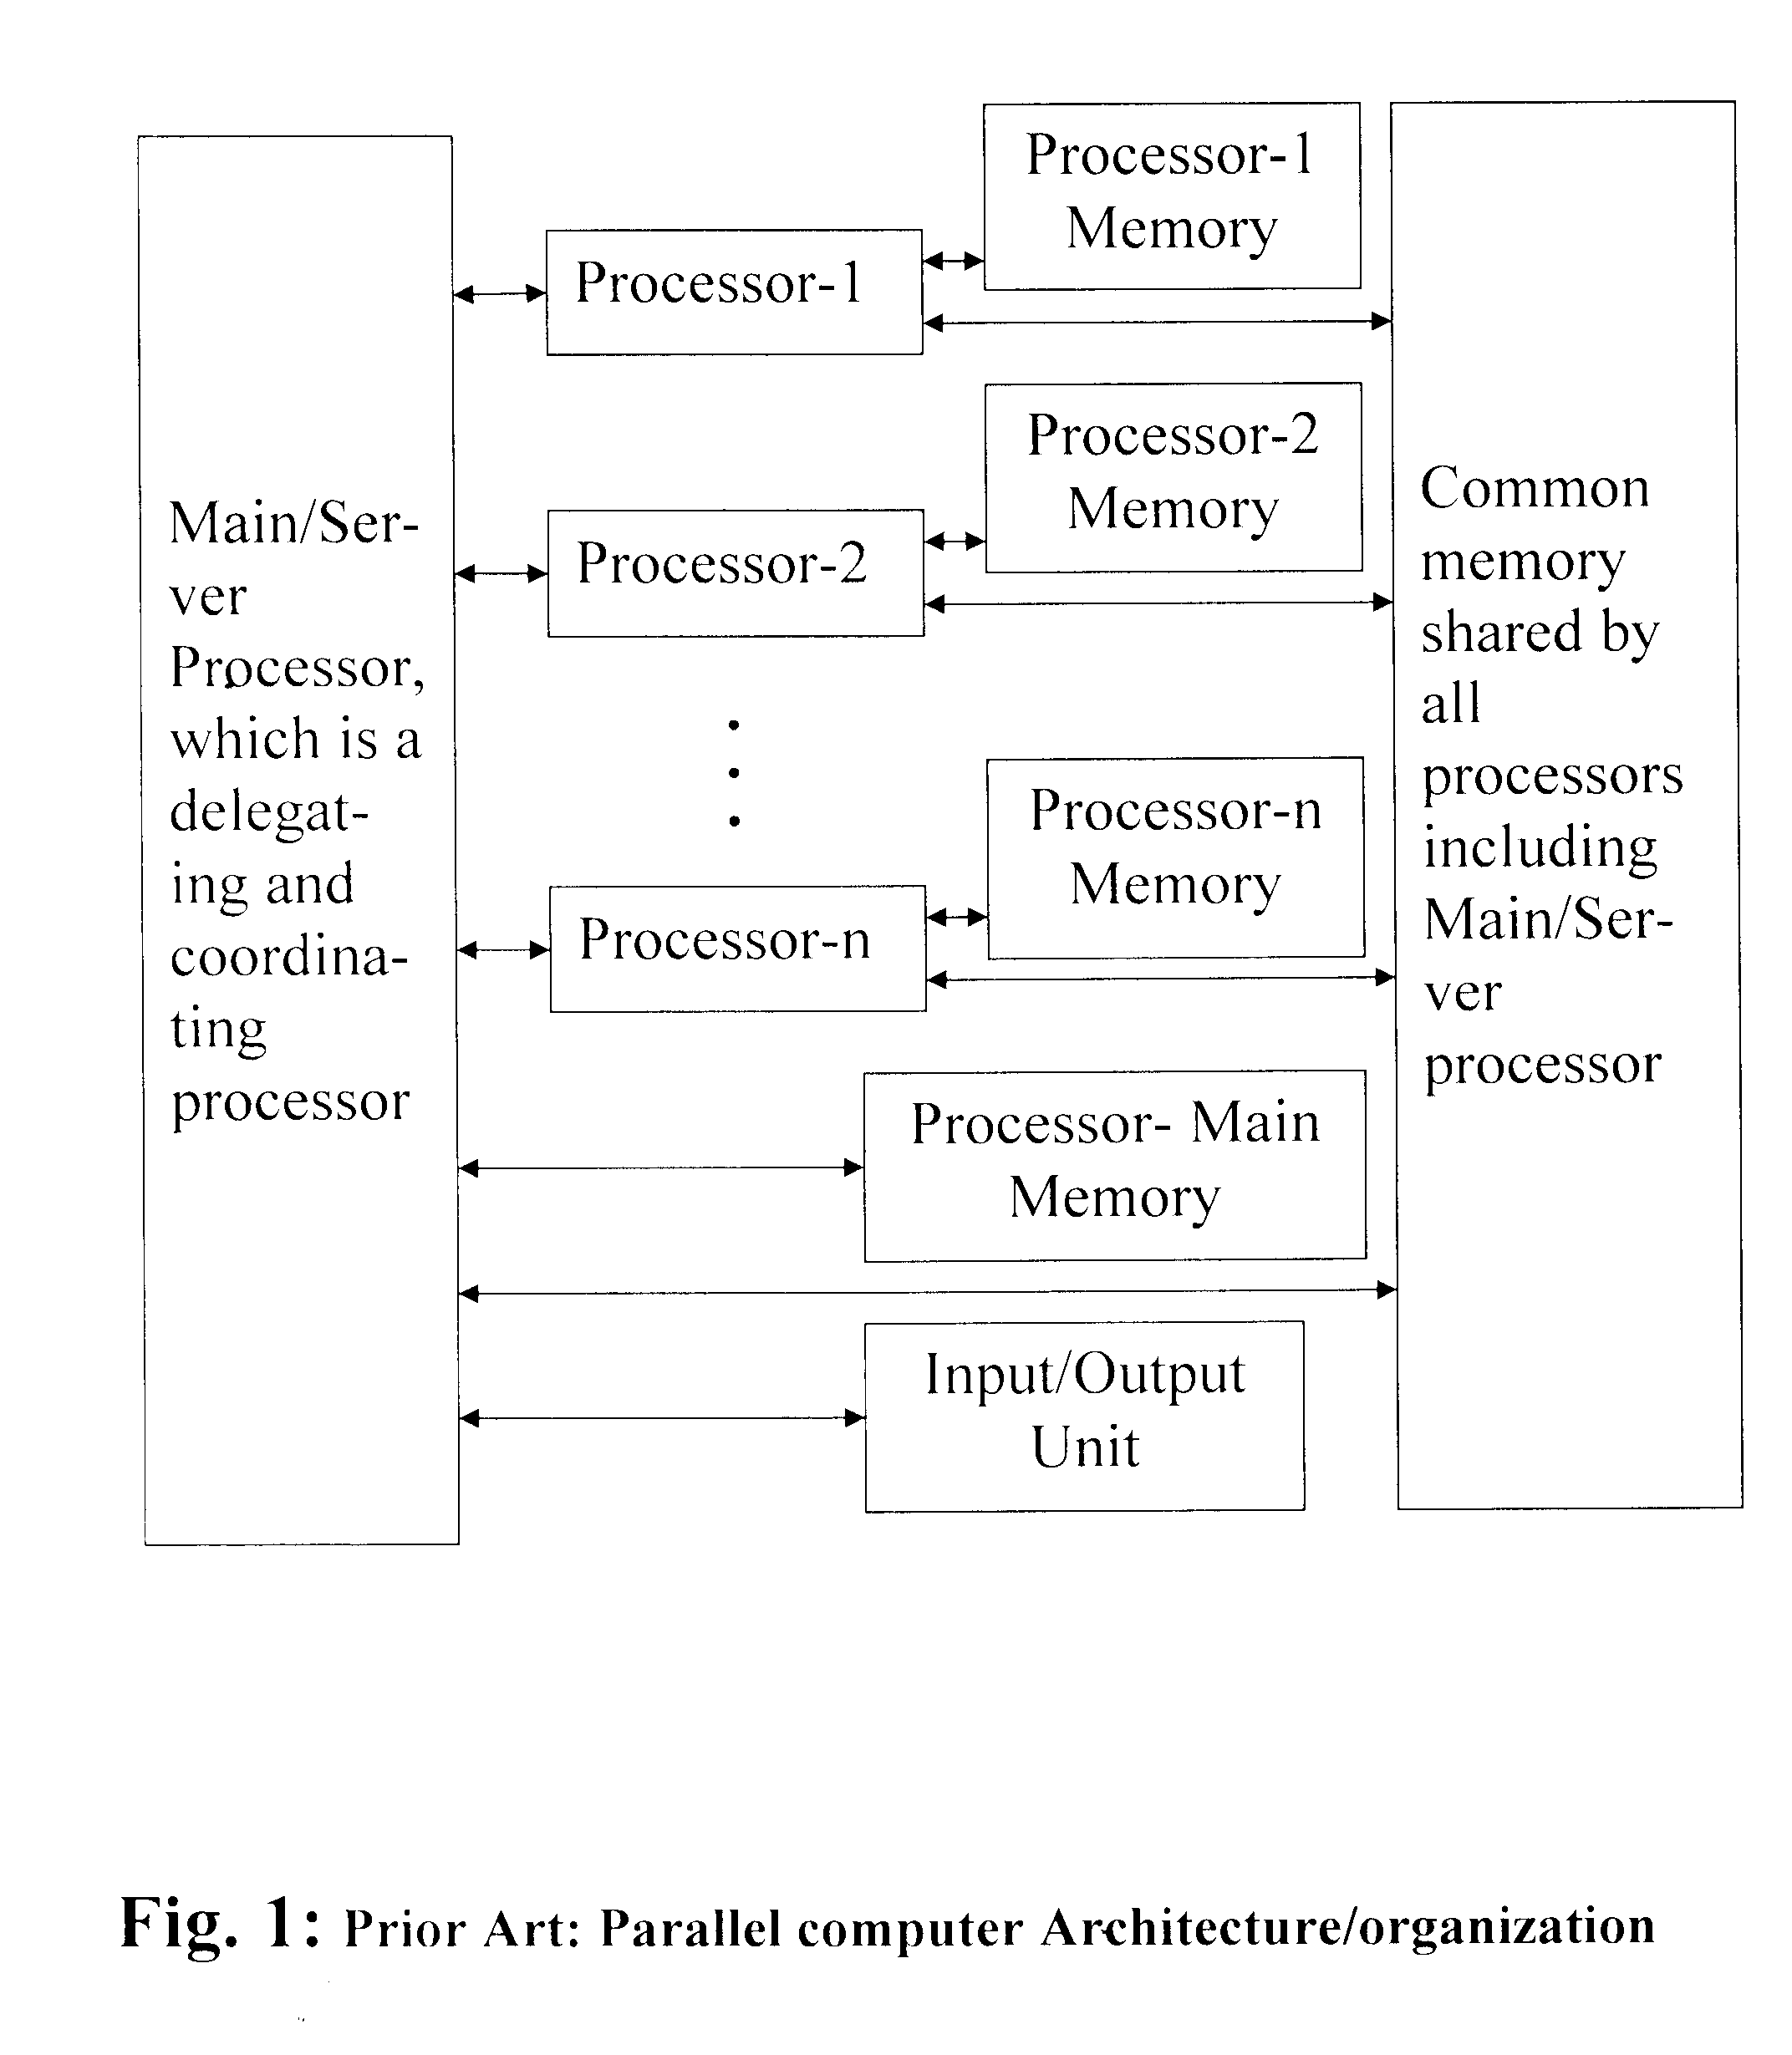 Multiprocessor Computing Apparatus with Wireless Interconnect for Communication among its Components